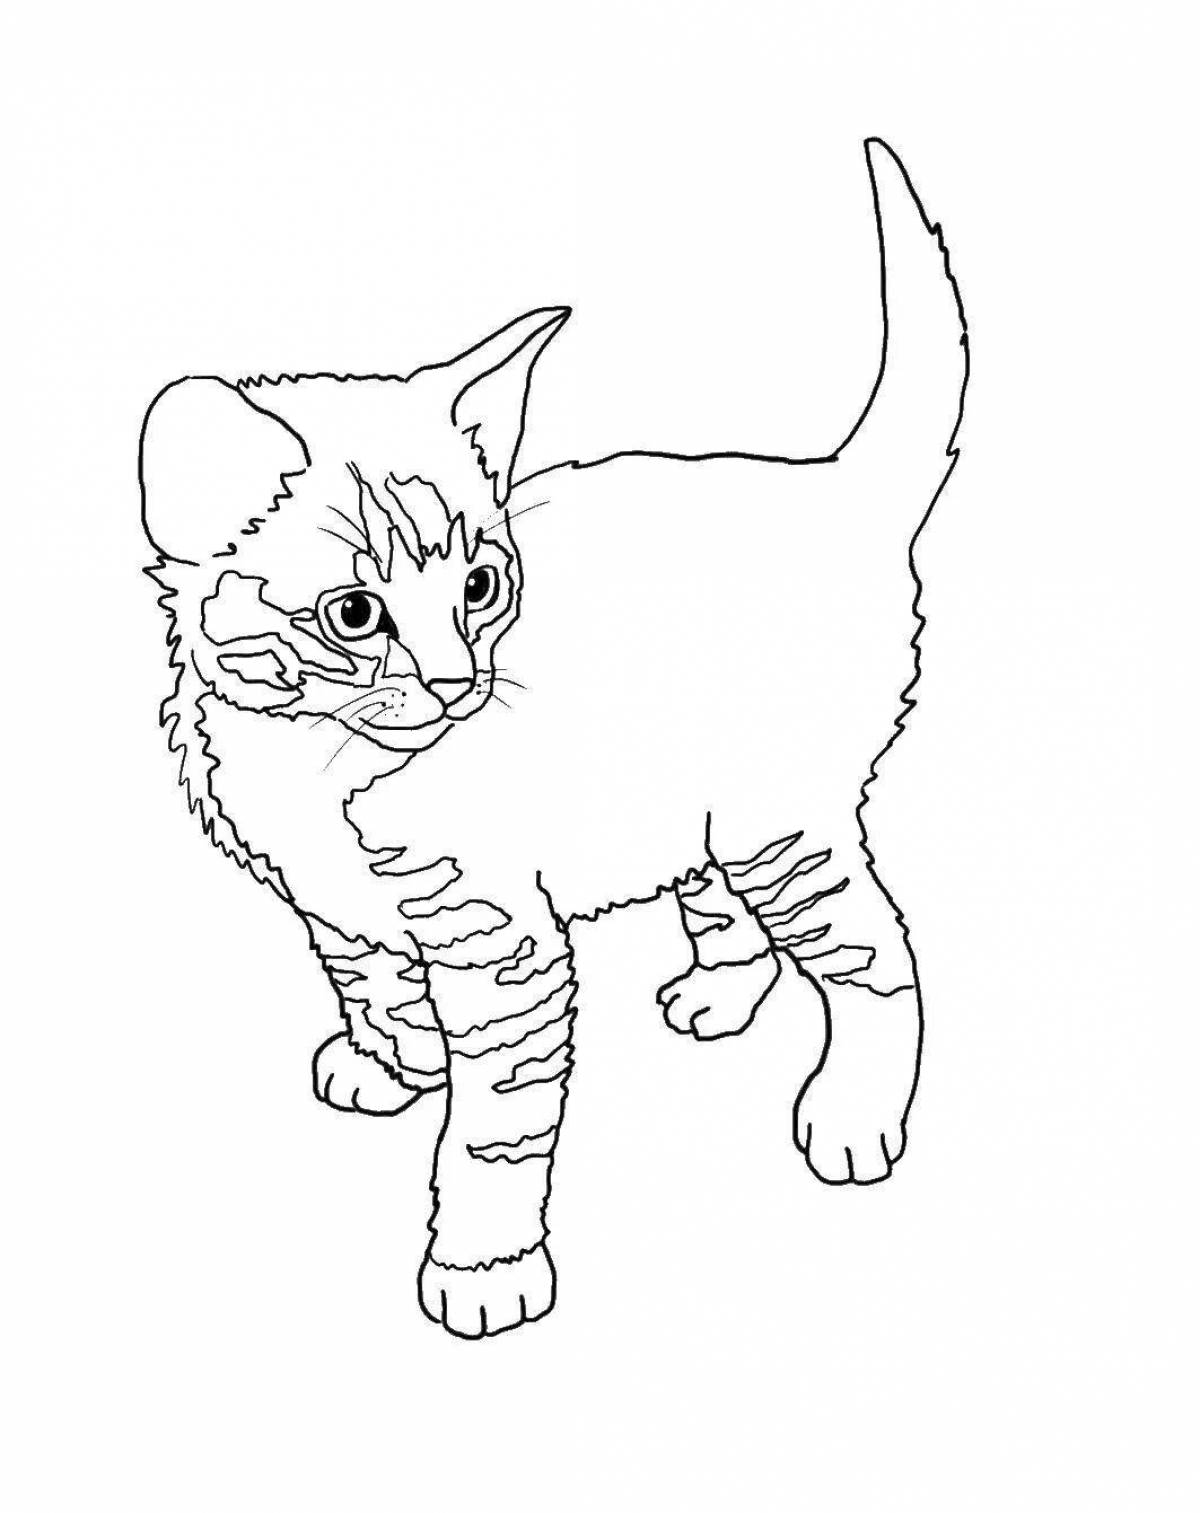 Snuggly cat coloring page